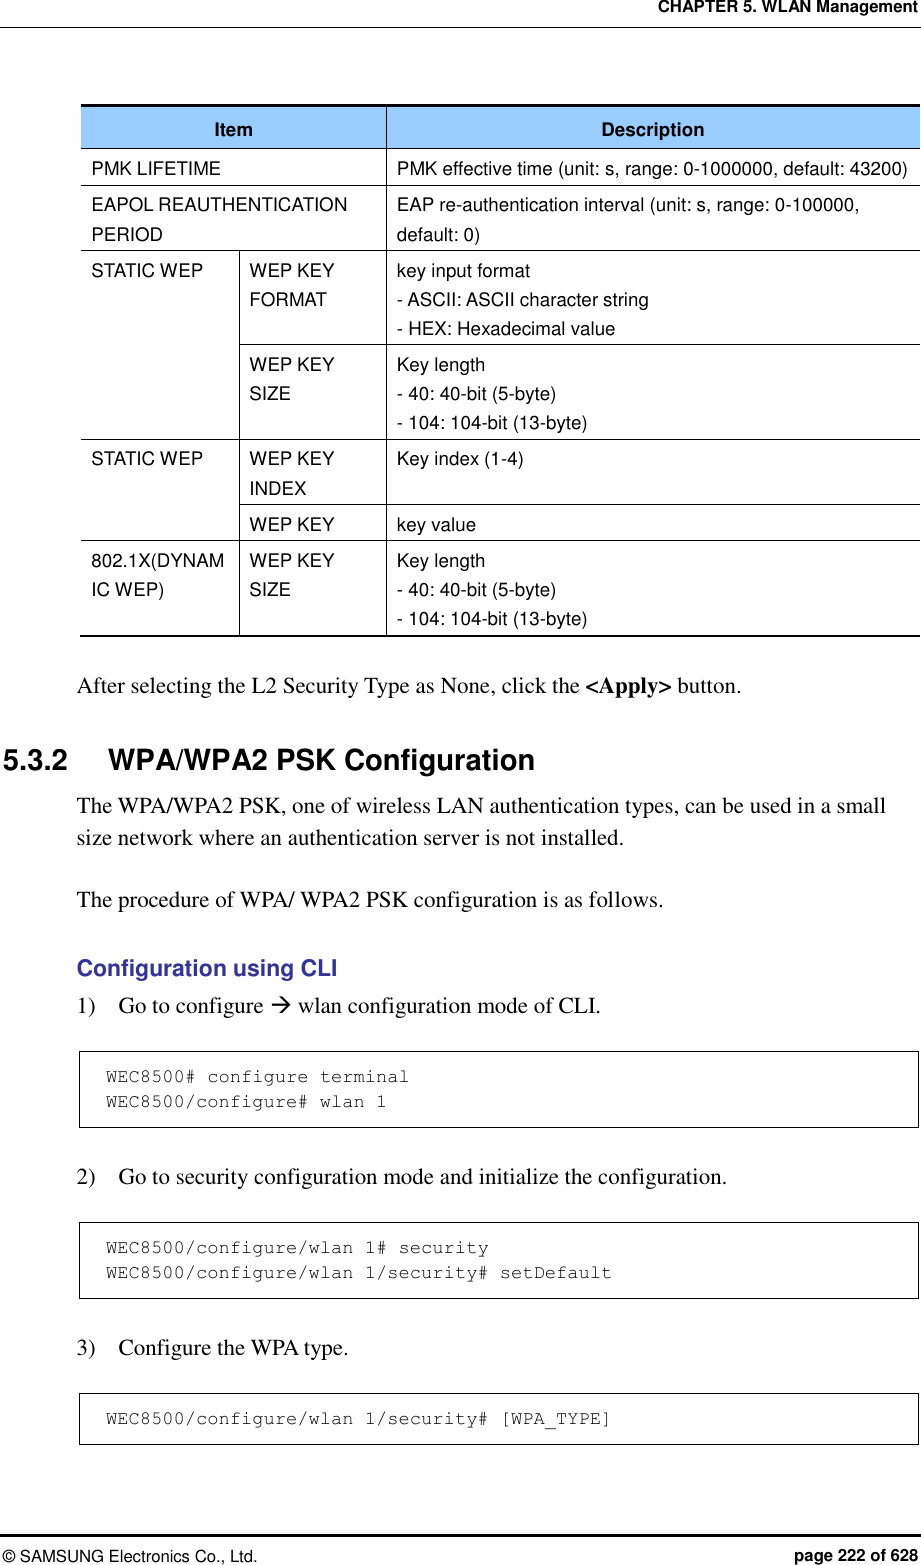 CHAPTER 5. WLAN Management ©  SAMSUNG Electronics Co., Ltd.  page 222 of 628 Item Description PMK LIFETIME PMK effective time (unit: s, range: 0-1000000, default: 43200) EAPOL REAUTHENTICATION PERIOD EAP re-authentication interval (unit: s, range: 0-100000, default: 0) STATIC WEP WEP KEY FORMAT key input format - ASCII: ASCII character string - HEX: Hexadecimal value WEP KEY SIZE Key length - 40: 40-bit (5-byte) - 104: 104-bit (13-byte) STATIC WEP WEP KEY INDEX Key index (1-4) WEP KEY key value 802.1X(DYNAMIC WEP) WEP KEY SIZE Key length - 40: 40-bit (5-byte) - 104: 104-bit (13-byte)  After selecting the L2 Security Type as None, click the &lt;Apply&gt; button.  5.3.2  WPA/WPA2 PSK Configuration The WPA/WPA2 PSK, one of wireless LAN authentication types, can be used in a small size network where an authentication server is not installed.  The procedure of WPA/ WPA2 PSK configuration is as follows.  Configuration using CLI 1)    Go to configure  wlan configuration mode of CLI.  WEC8500# configure terminal WEC8500/configure# wlan 1   2)    Go to security configuration mode and initialize the configuration.  WEC8500/configure/wlan 1# security WEC8500/configure/wlan 1/security# setDefault  3)    Configure the WPA type.  WEC8500/configure/wlan 1/security# [WPA_TYPE] 